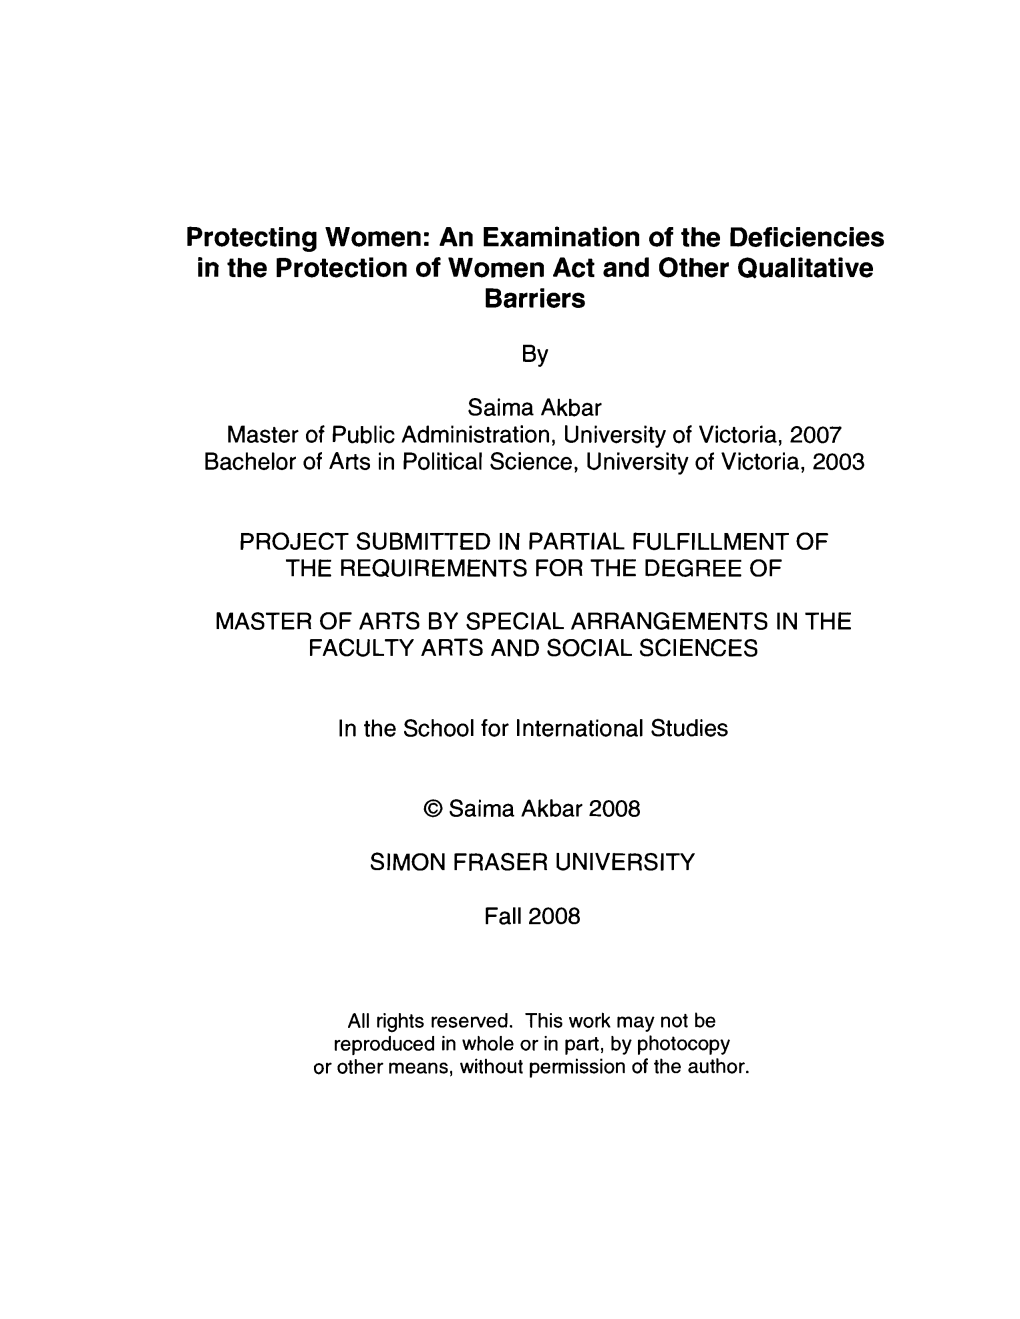 Protecting Women: an Examination of the Deficiencies in the Protection of Women Act and Other Qualitative Barriers